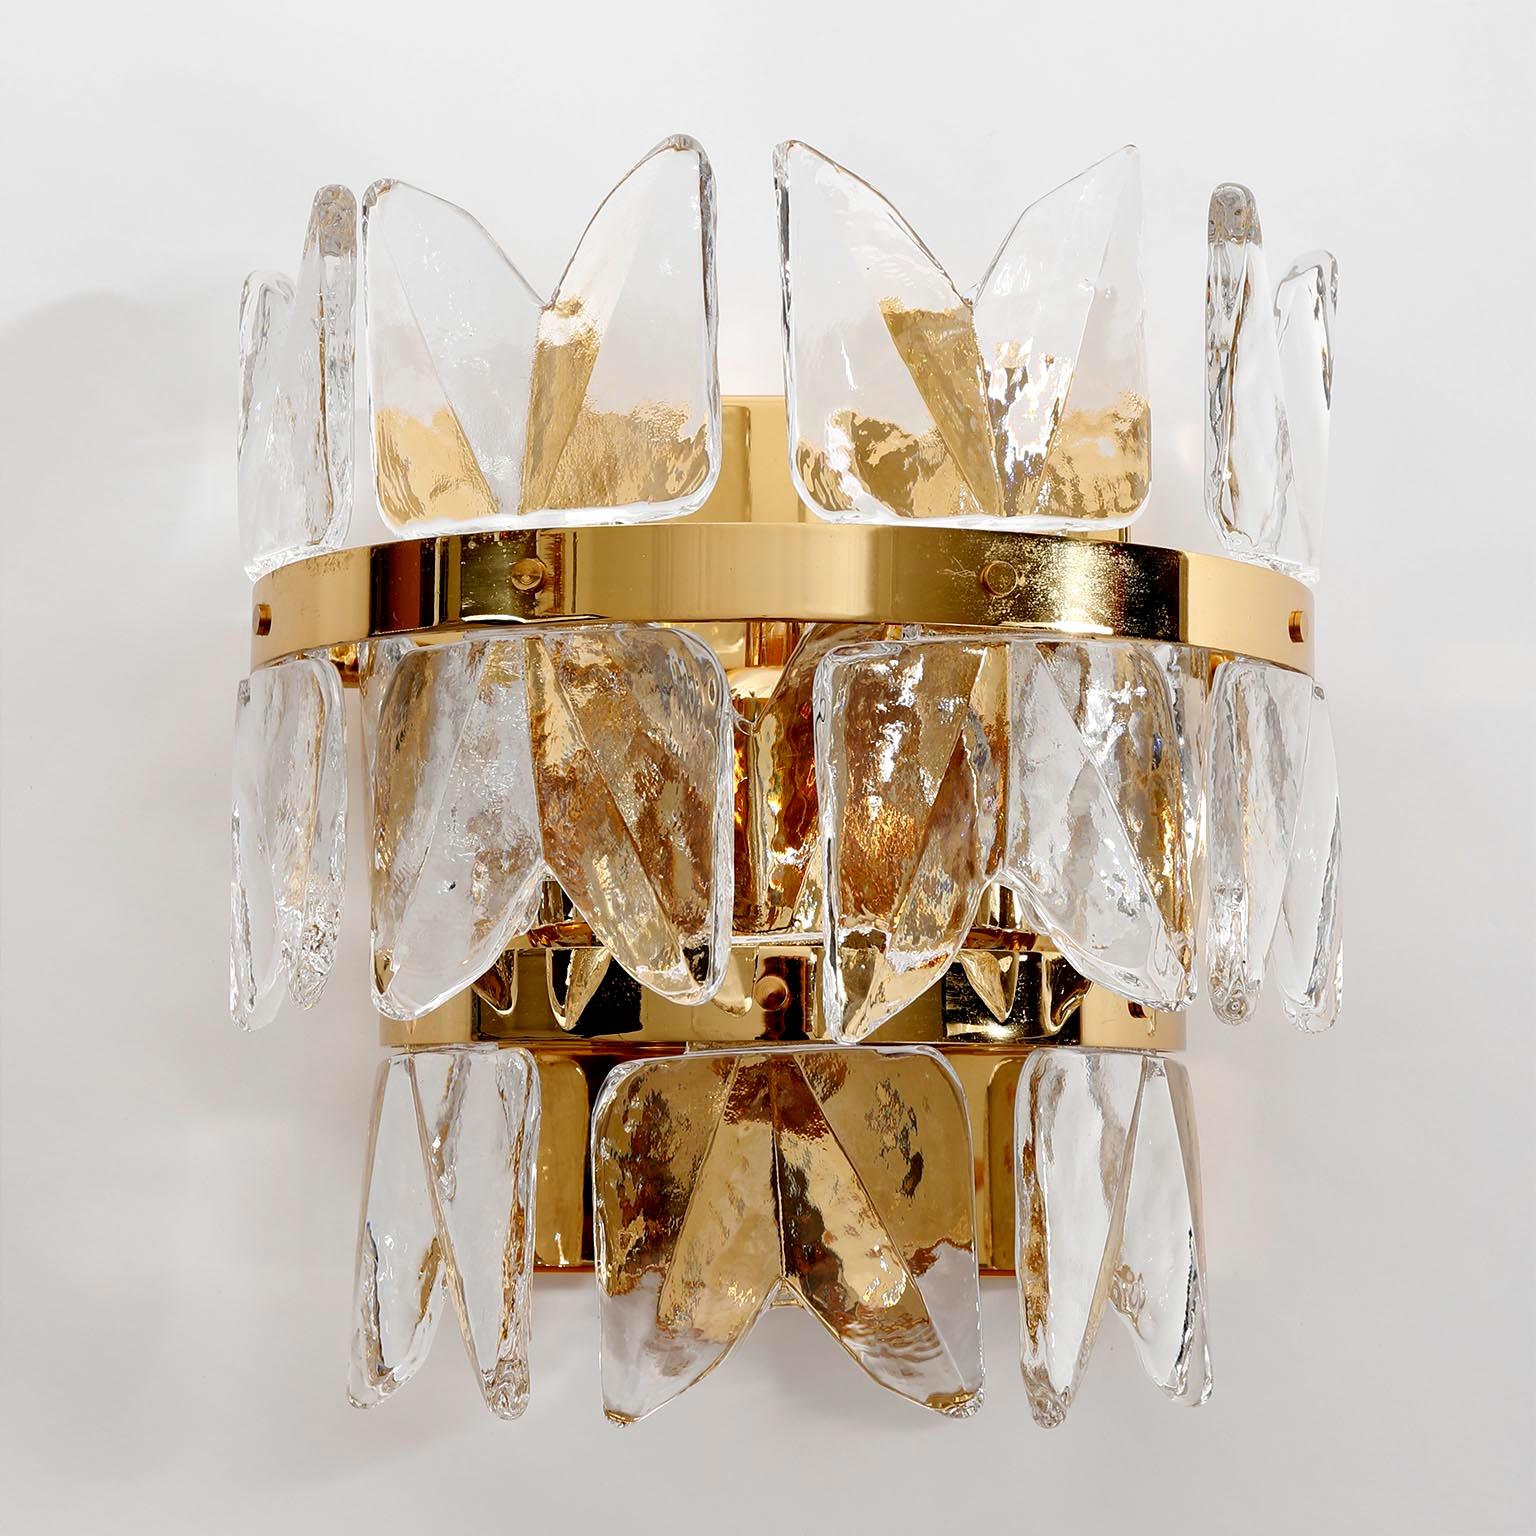 A pair of very exclusive Hollywood regency ice glass wall lamps model 'Corina' by J.T. Kalmar, Vienna, Austria, manufactured in midcentury, circa 1970 (late 1960s or early 1970s).
High quality items which are made of a 24-carat gilded polished brass